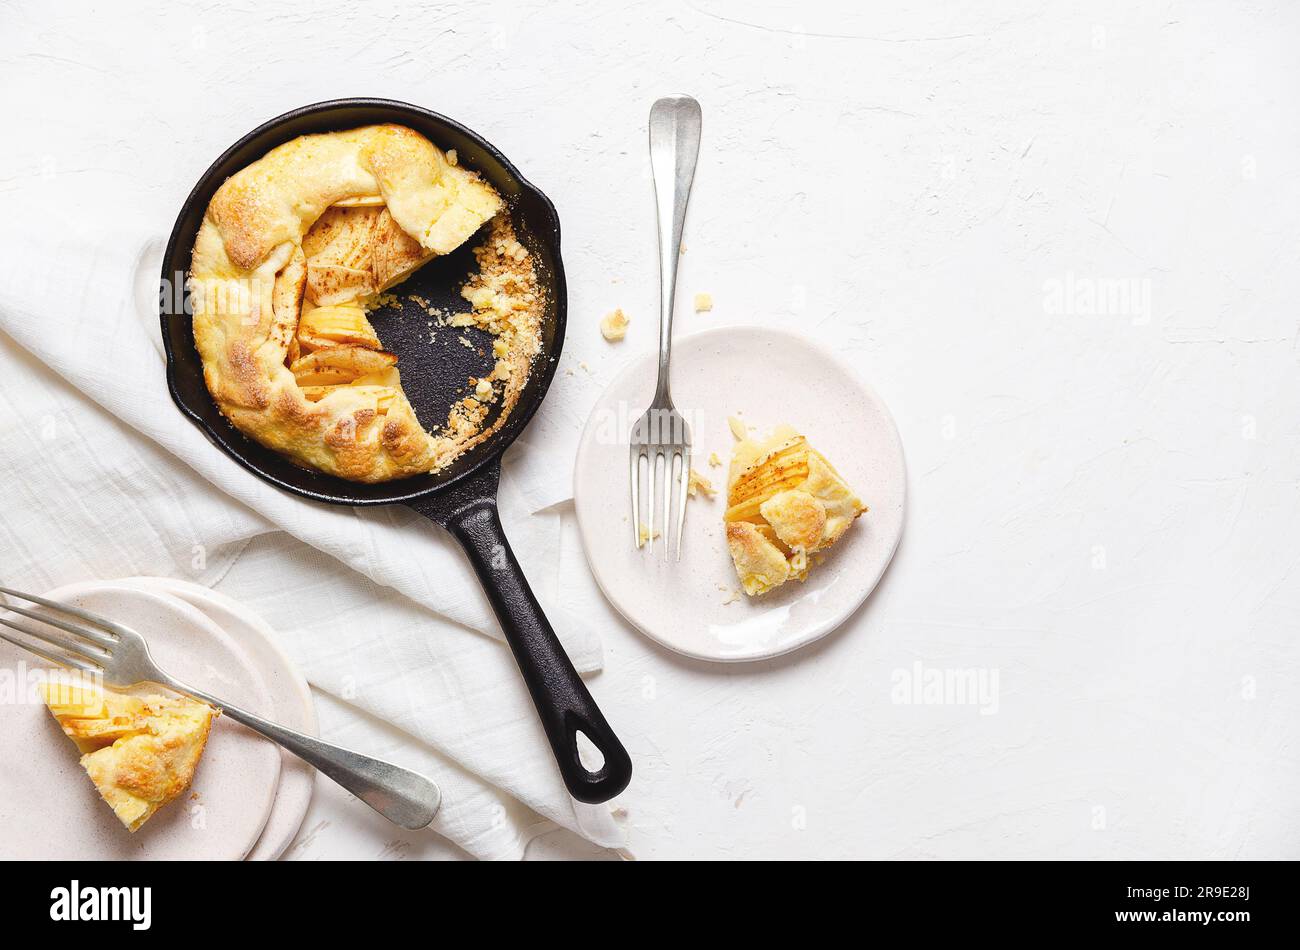 Apple galette in a black pan, two pieces of galette in white plates with forks and a piece of white cloth on a white background with copy space. Stock Photo